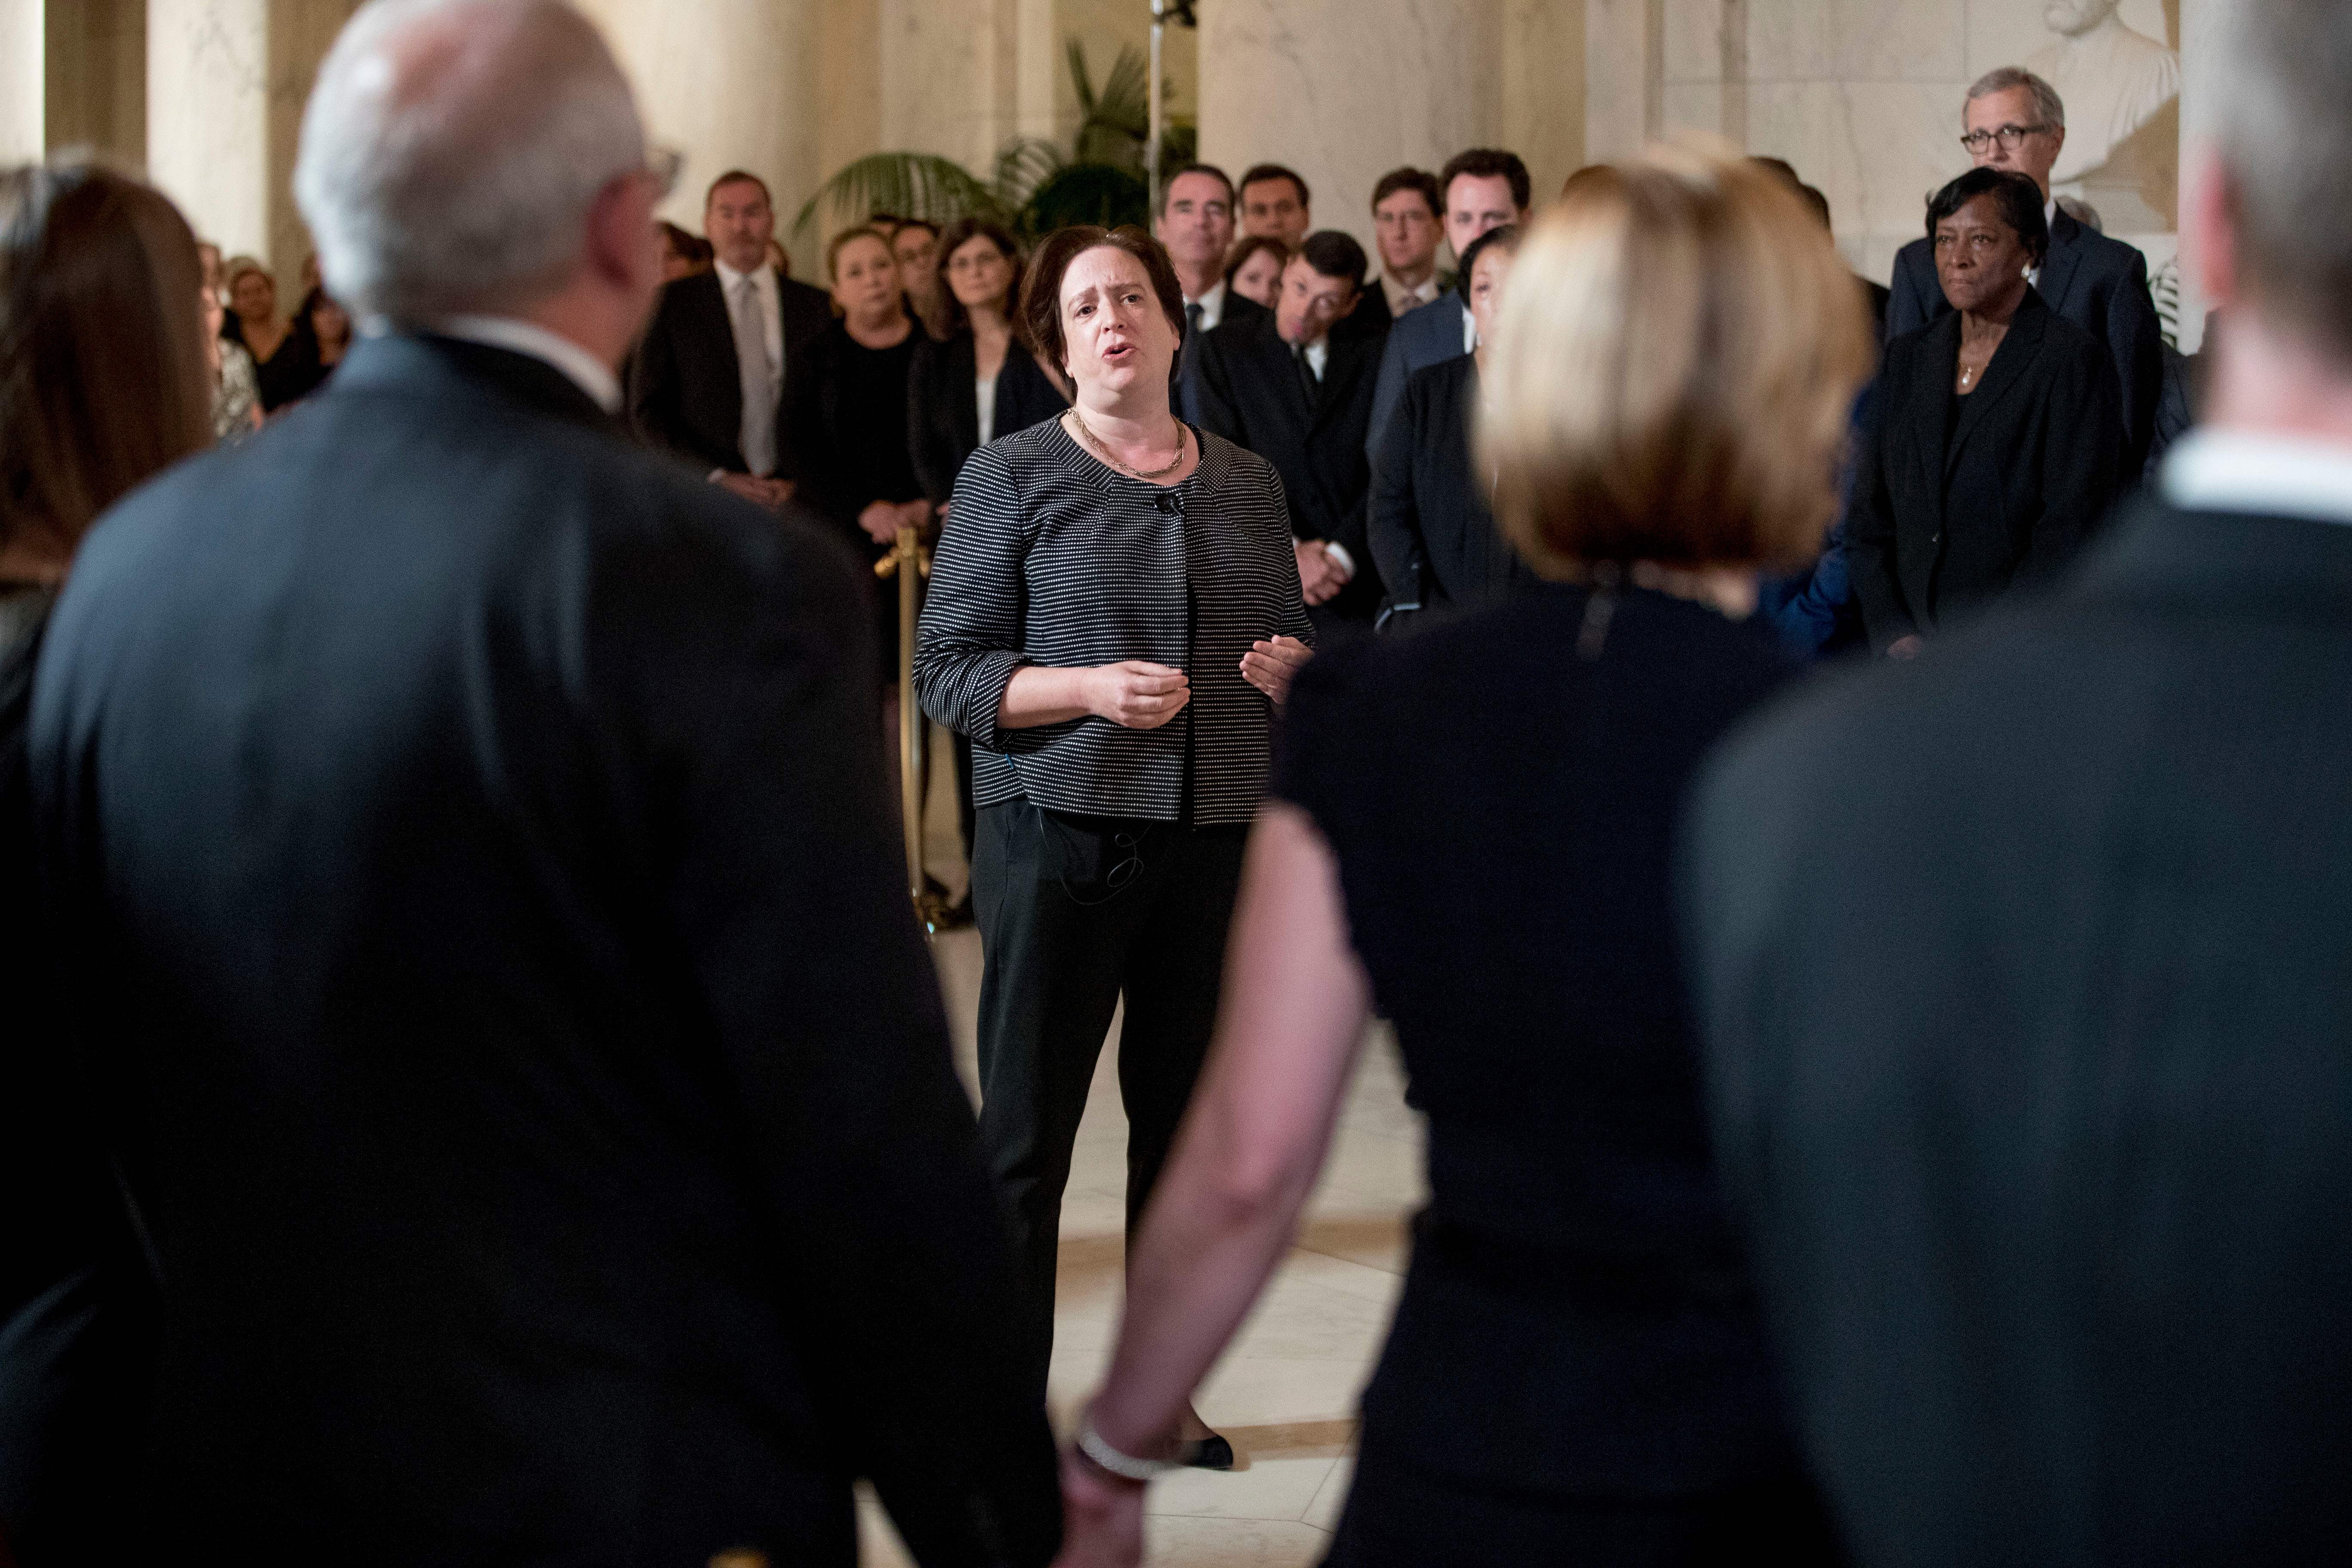 Justice Elena Kagan speaks at a private ceremony honoring the late Justice John Paul Stevens. (Andrew Harnik/AFP/Getty Images)